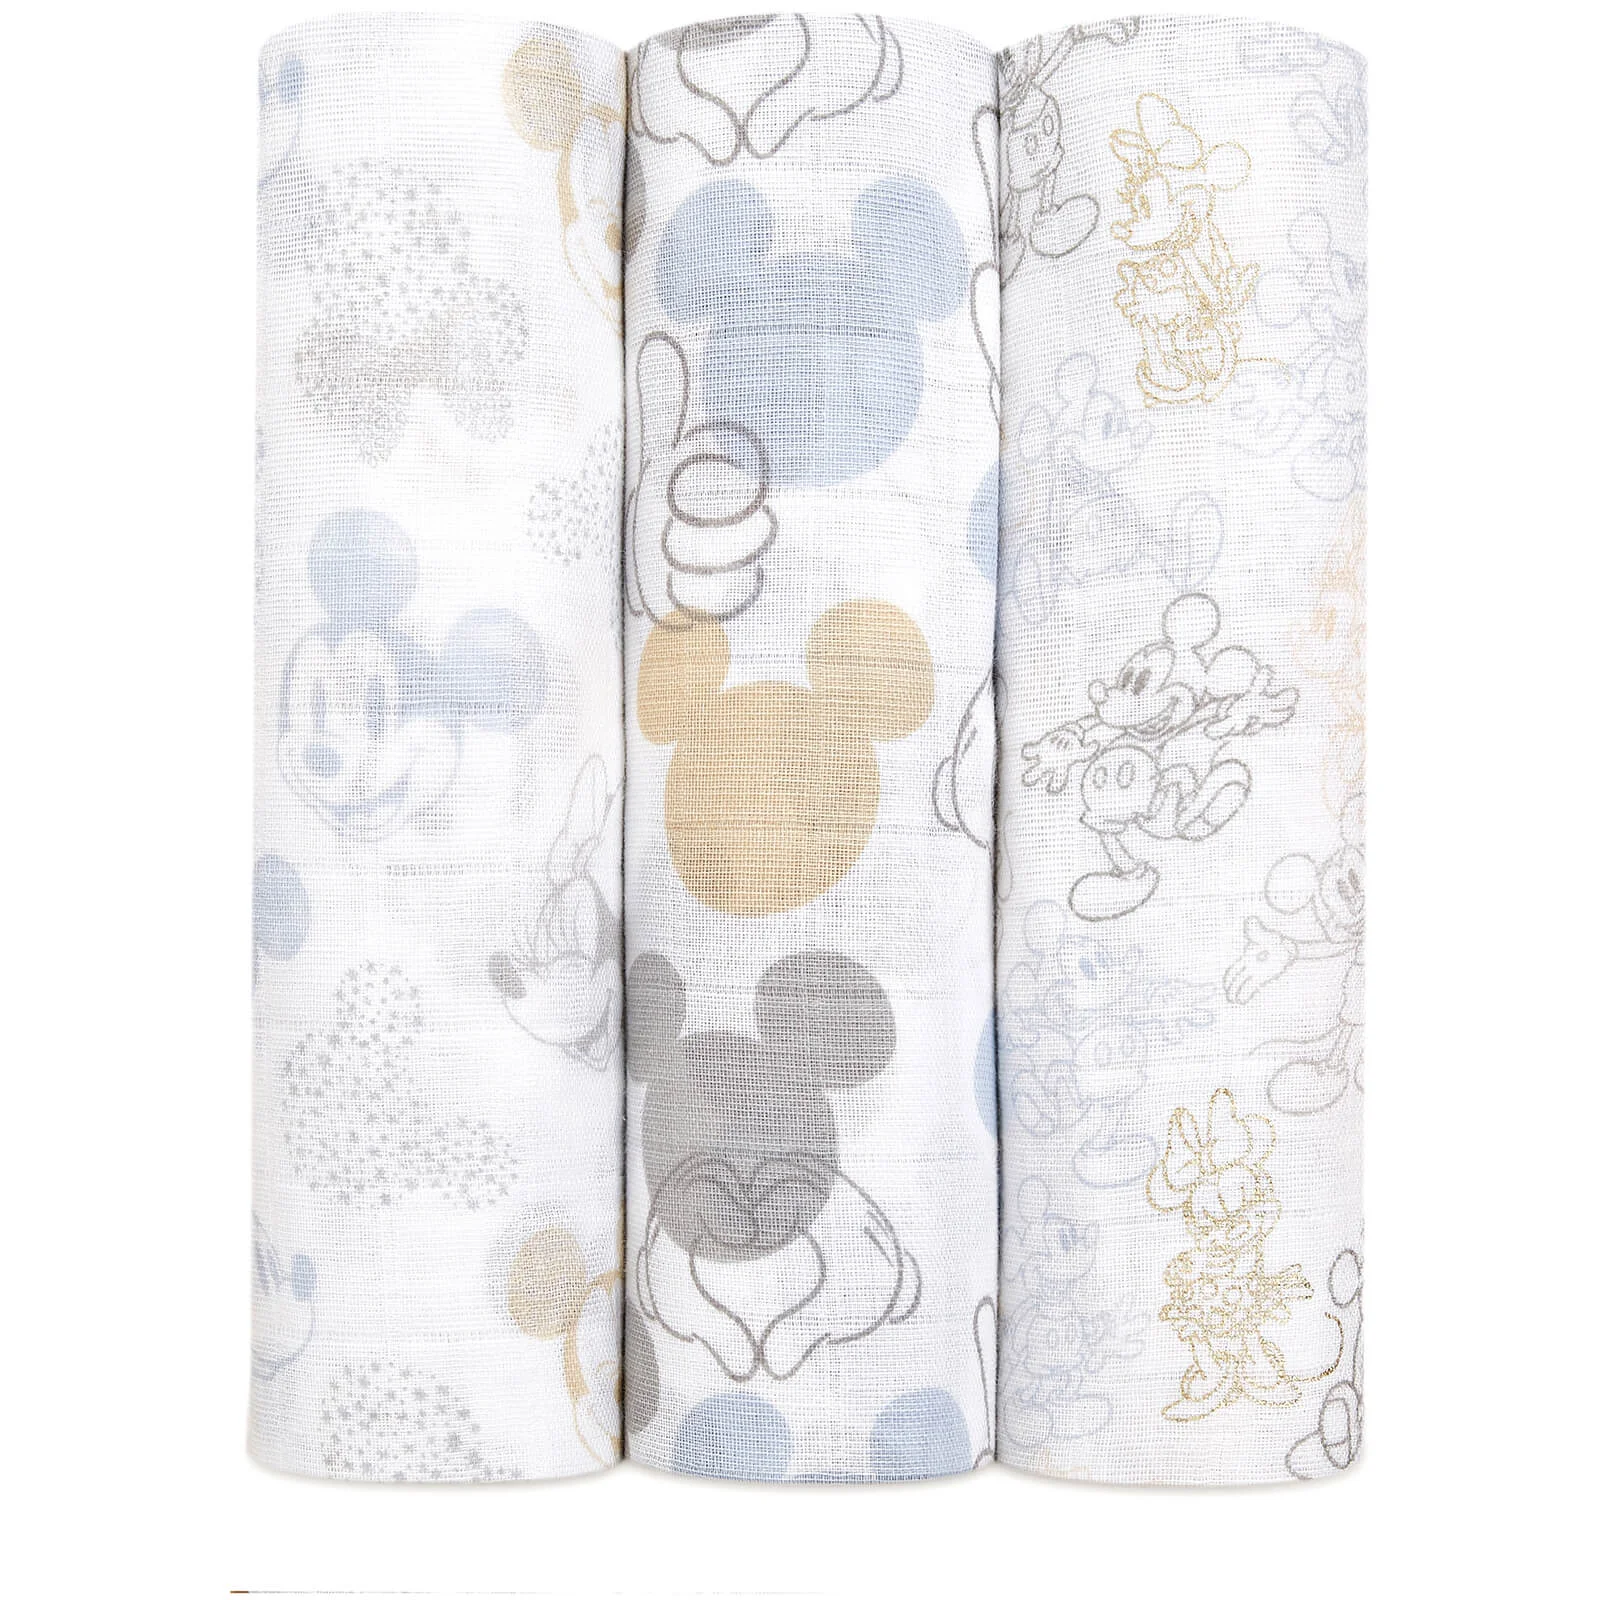 aden + anais Disney Metallic Swaddles - Mickey and Minnie (3 Pack) Image 1